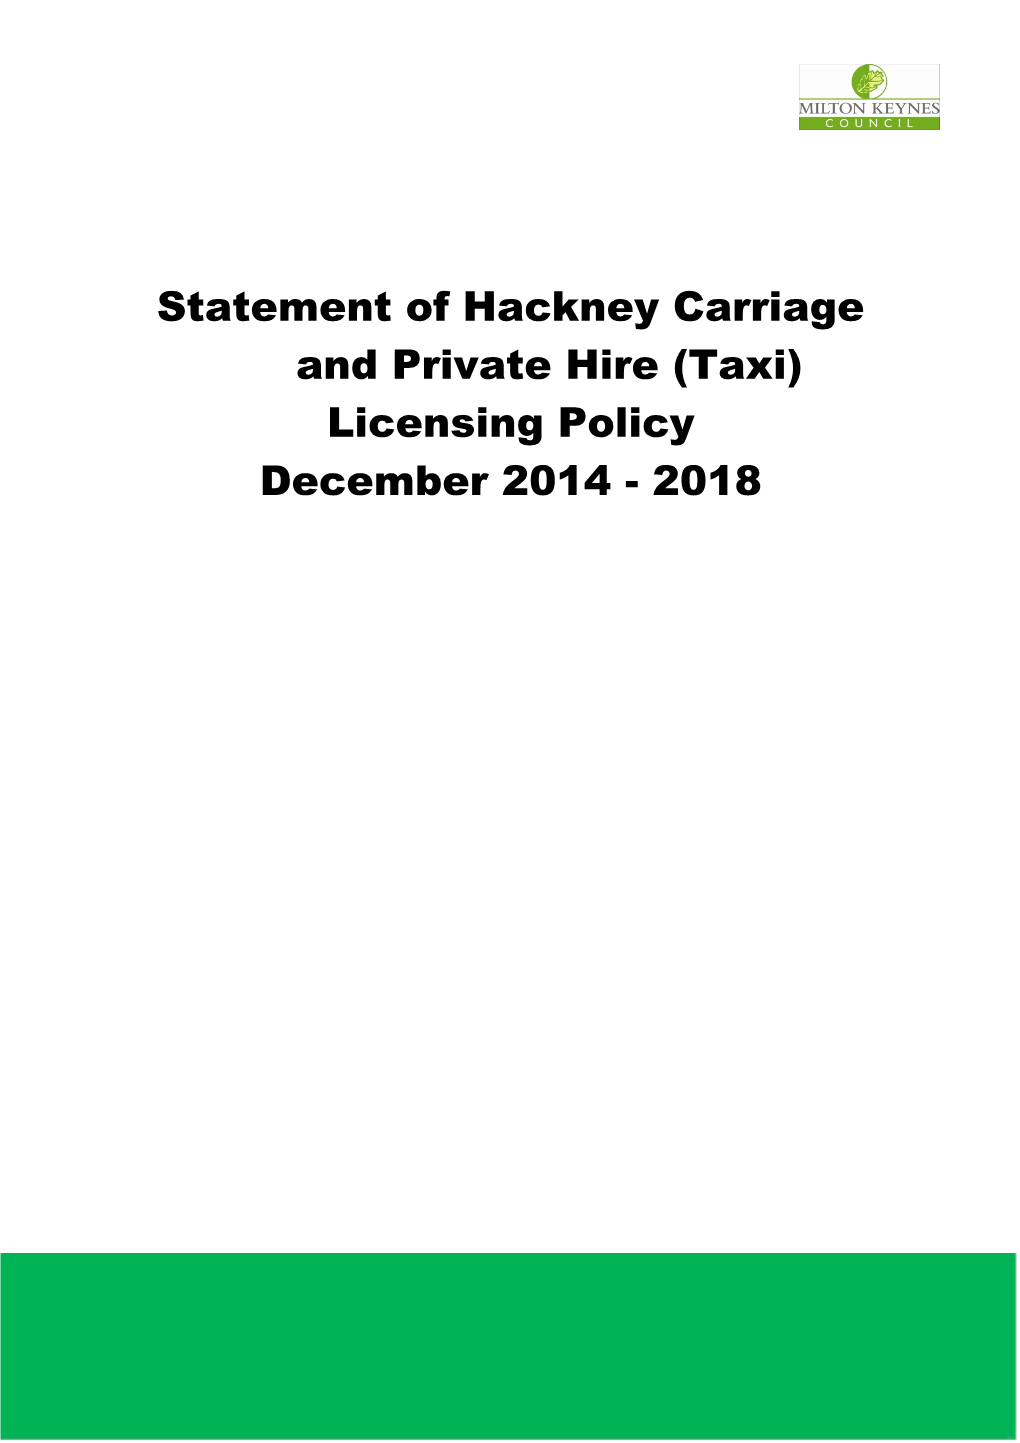 Statement of Hackney Carriage and Private Hire (Taxi)